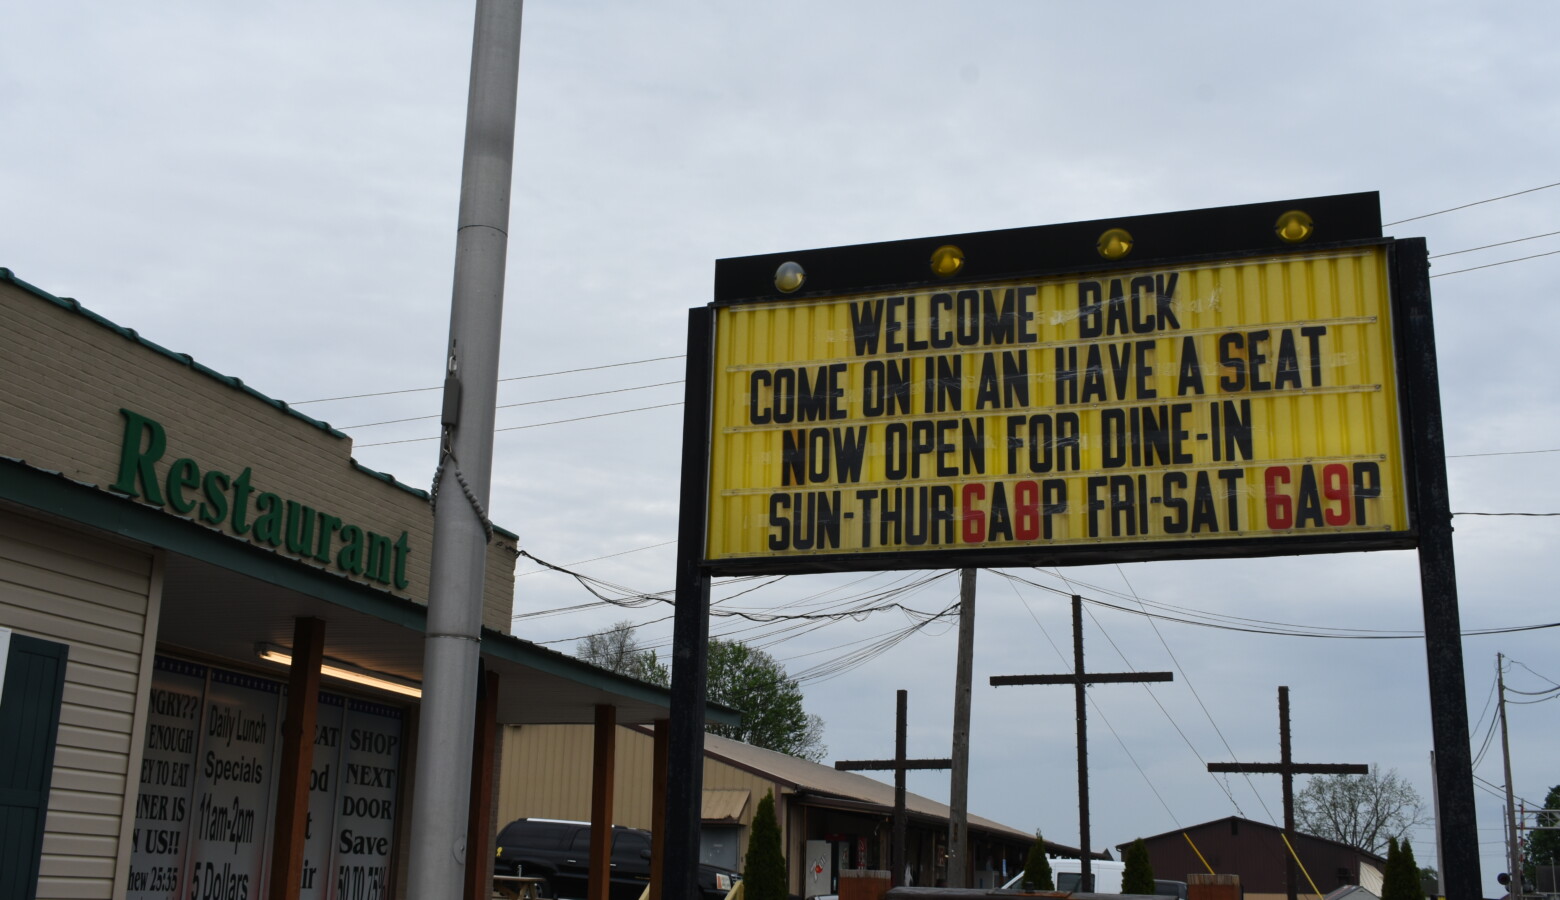 A sign outside the Liberty Bell Restaurant in Liberty, Indiana welcomes customers back after closing briefly in accordance with Indiana's COVID-19 regulations. (Justin Hicks / IPB News)